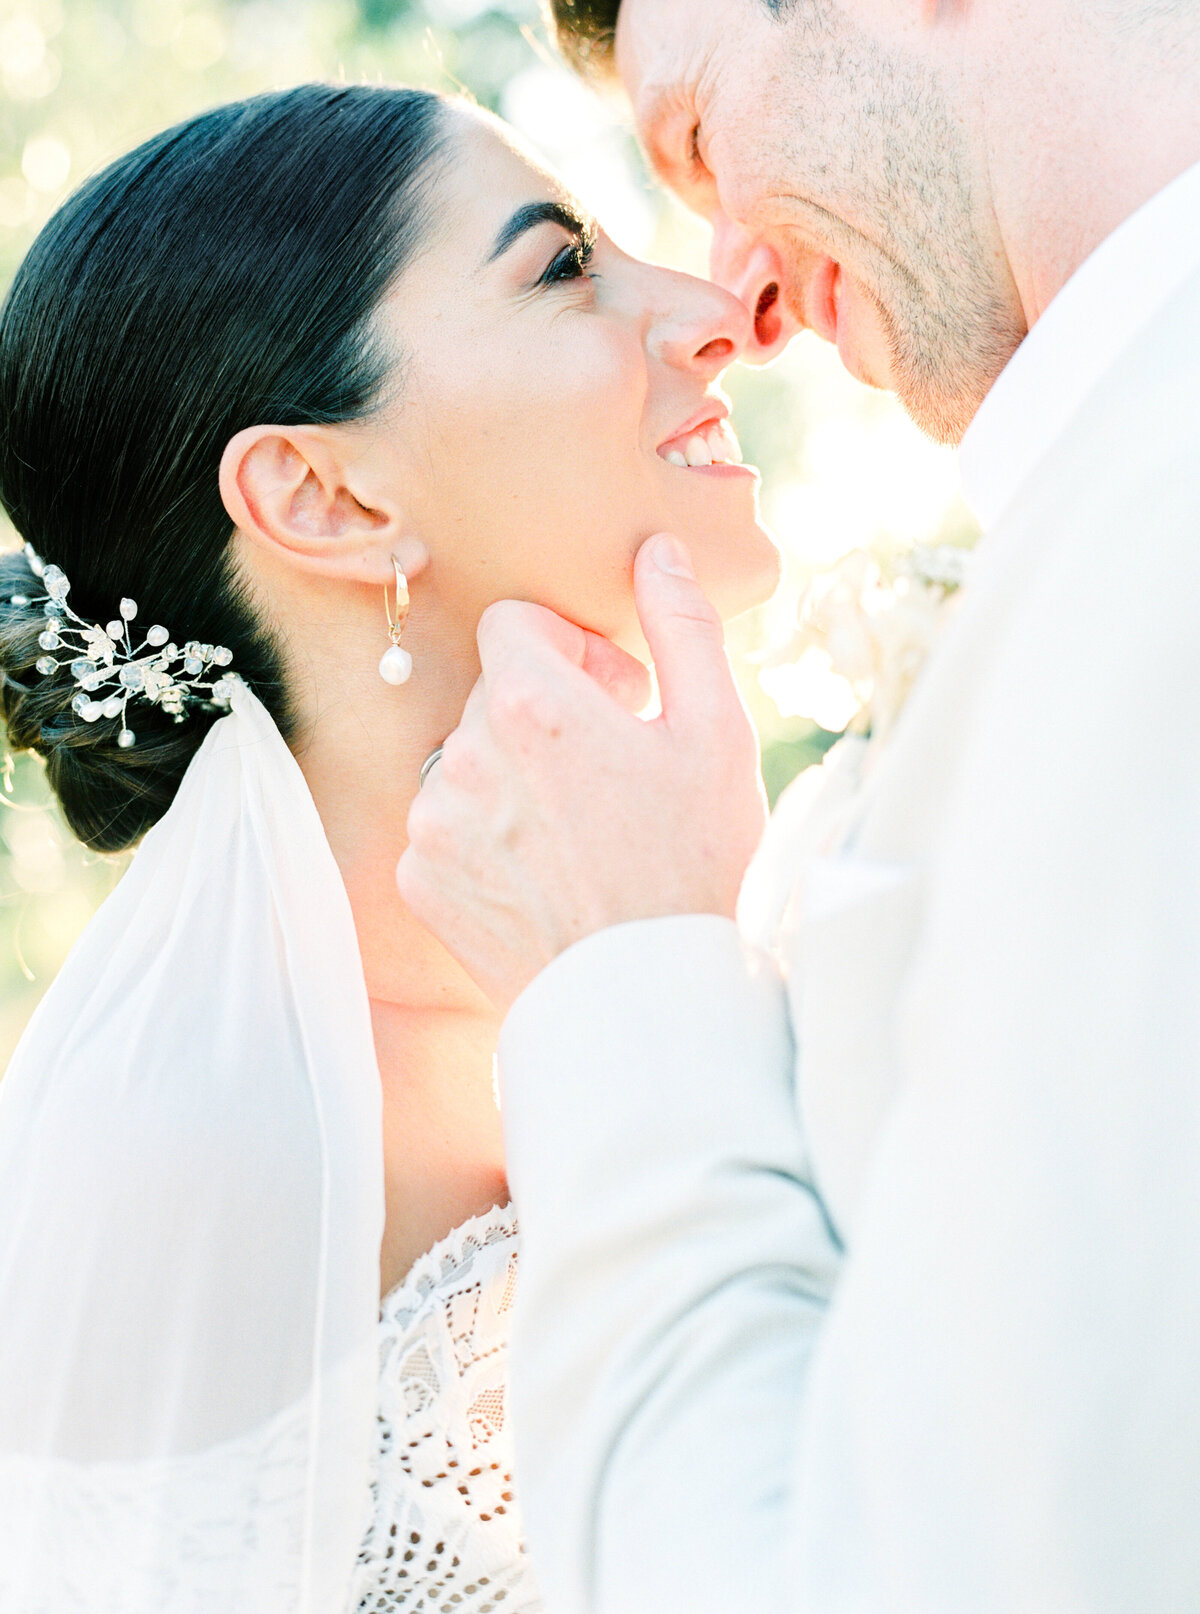 Film photograph of close up of bride and groom smiling and almost kissing photographed by Italy wedding photographer at Villa Montanare Tuscany wedding